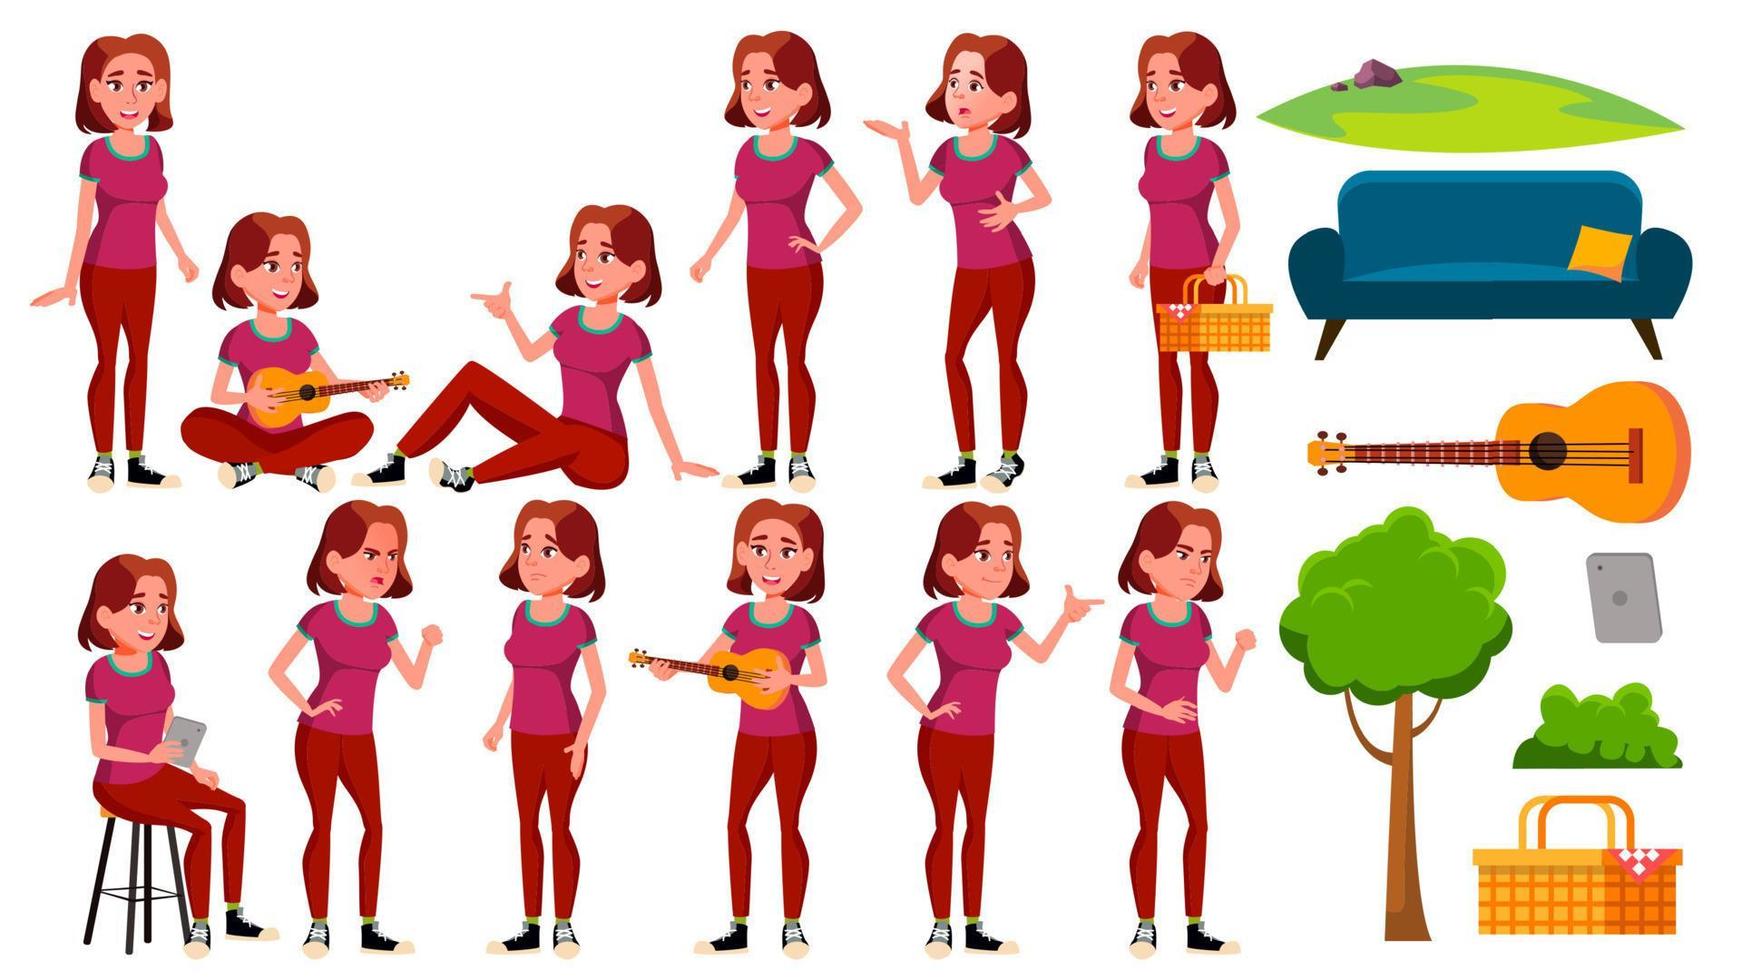 Teen Girl Poses Set Vector. Fun, Cheerful. For Web, Poster, Booklet Design. Isolated Cartoon Illustration vector